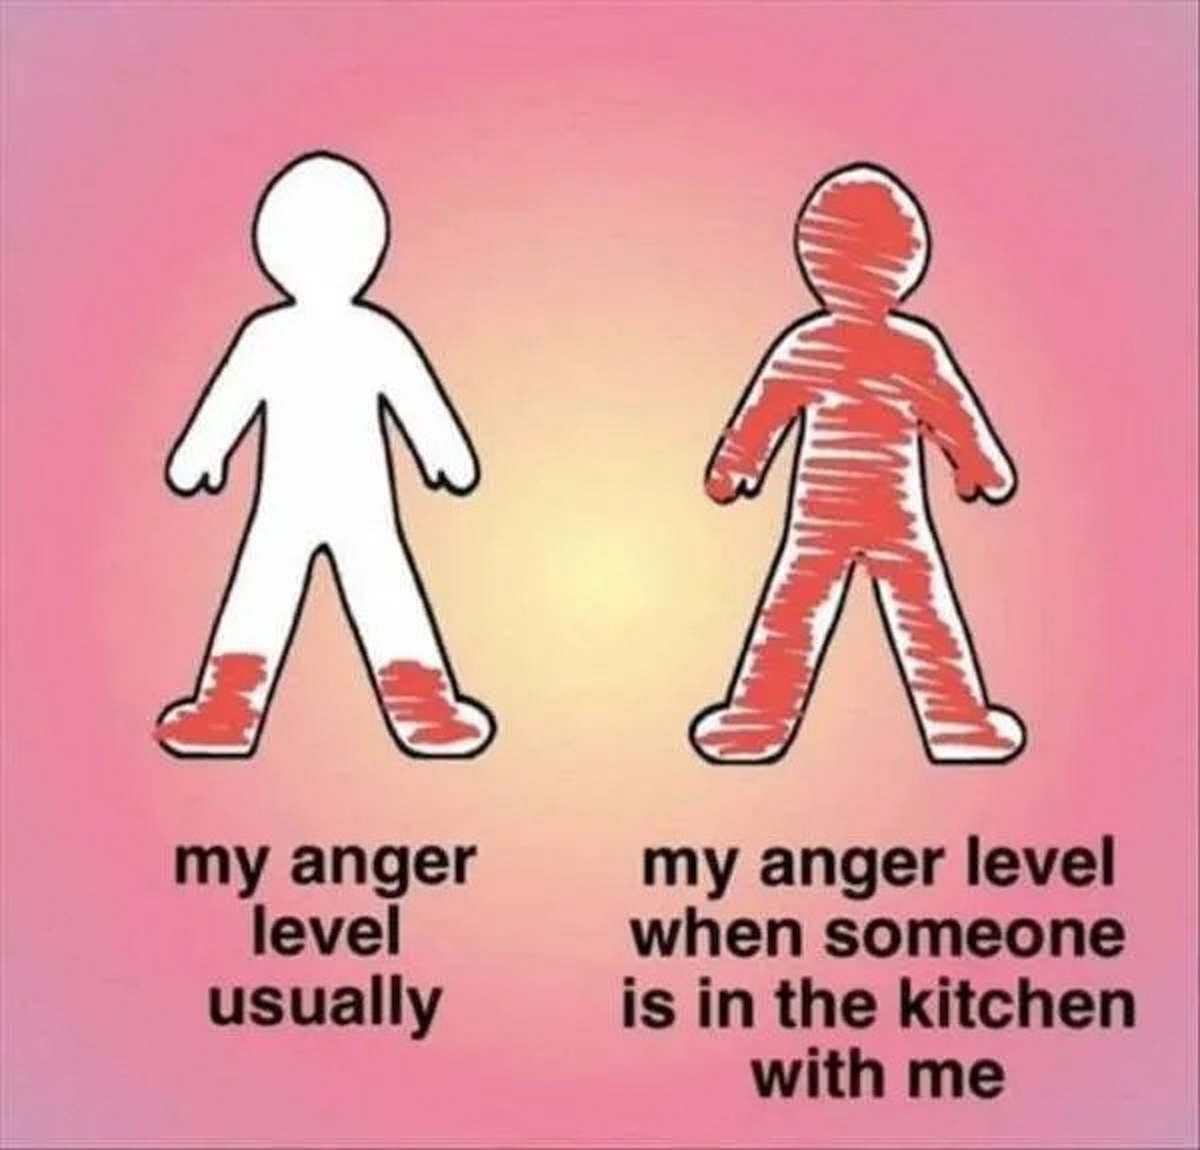 my anger level meme template - A A my anger level usually my anger level when someone is in the kitchen with me